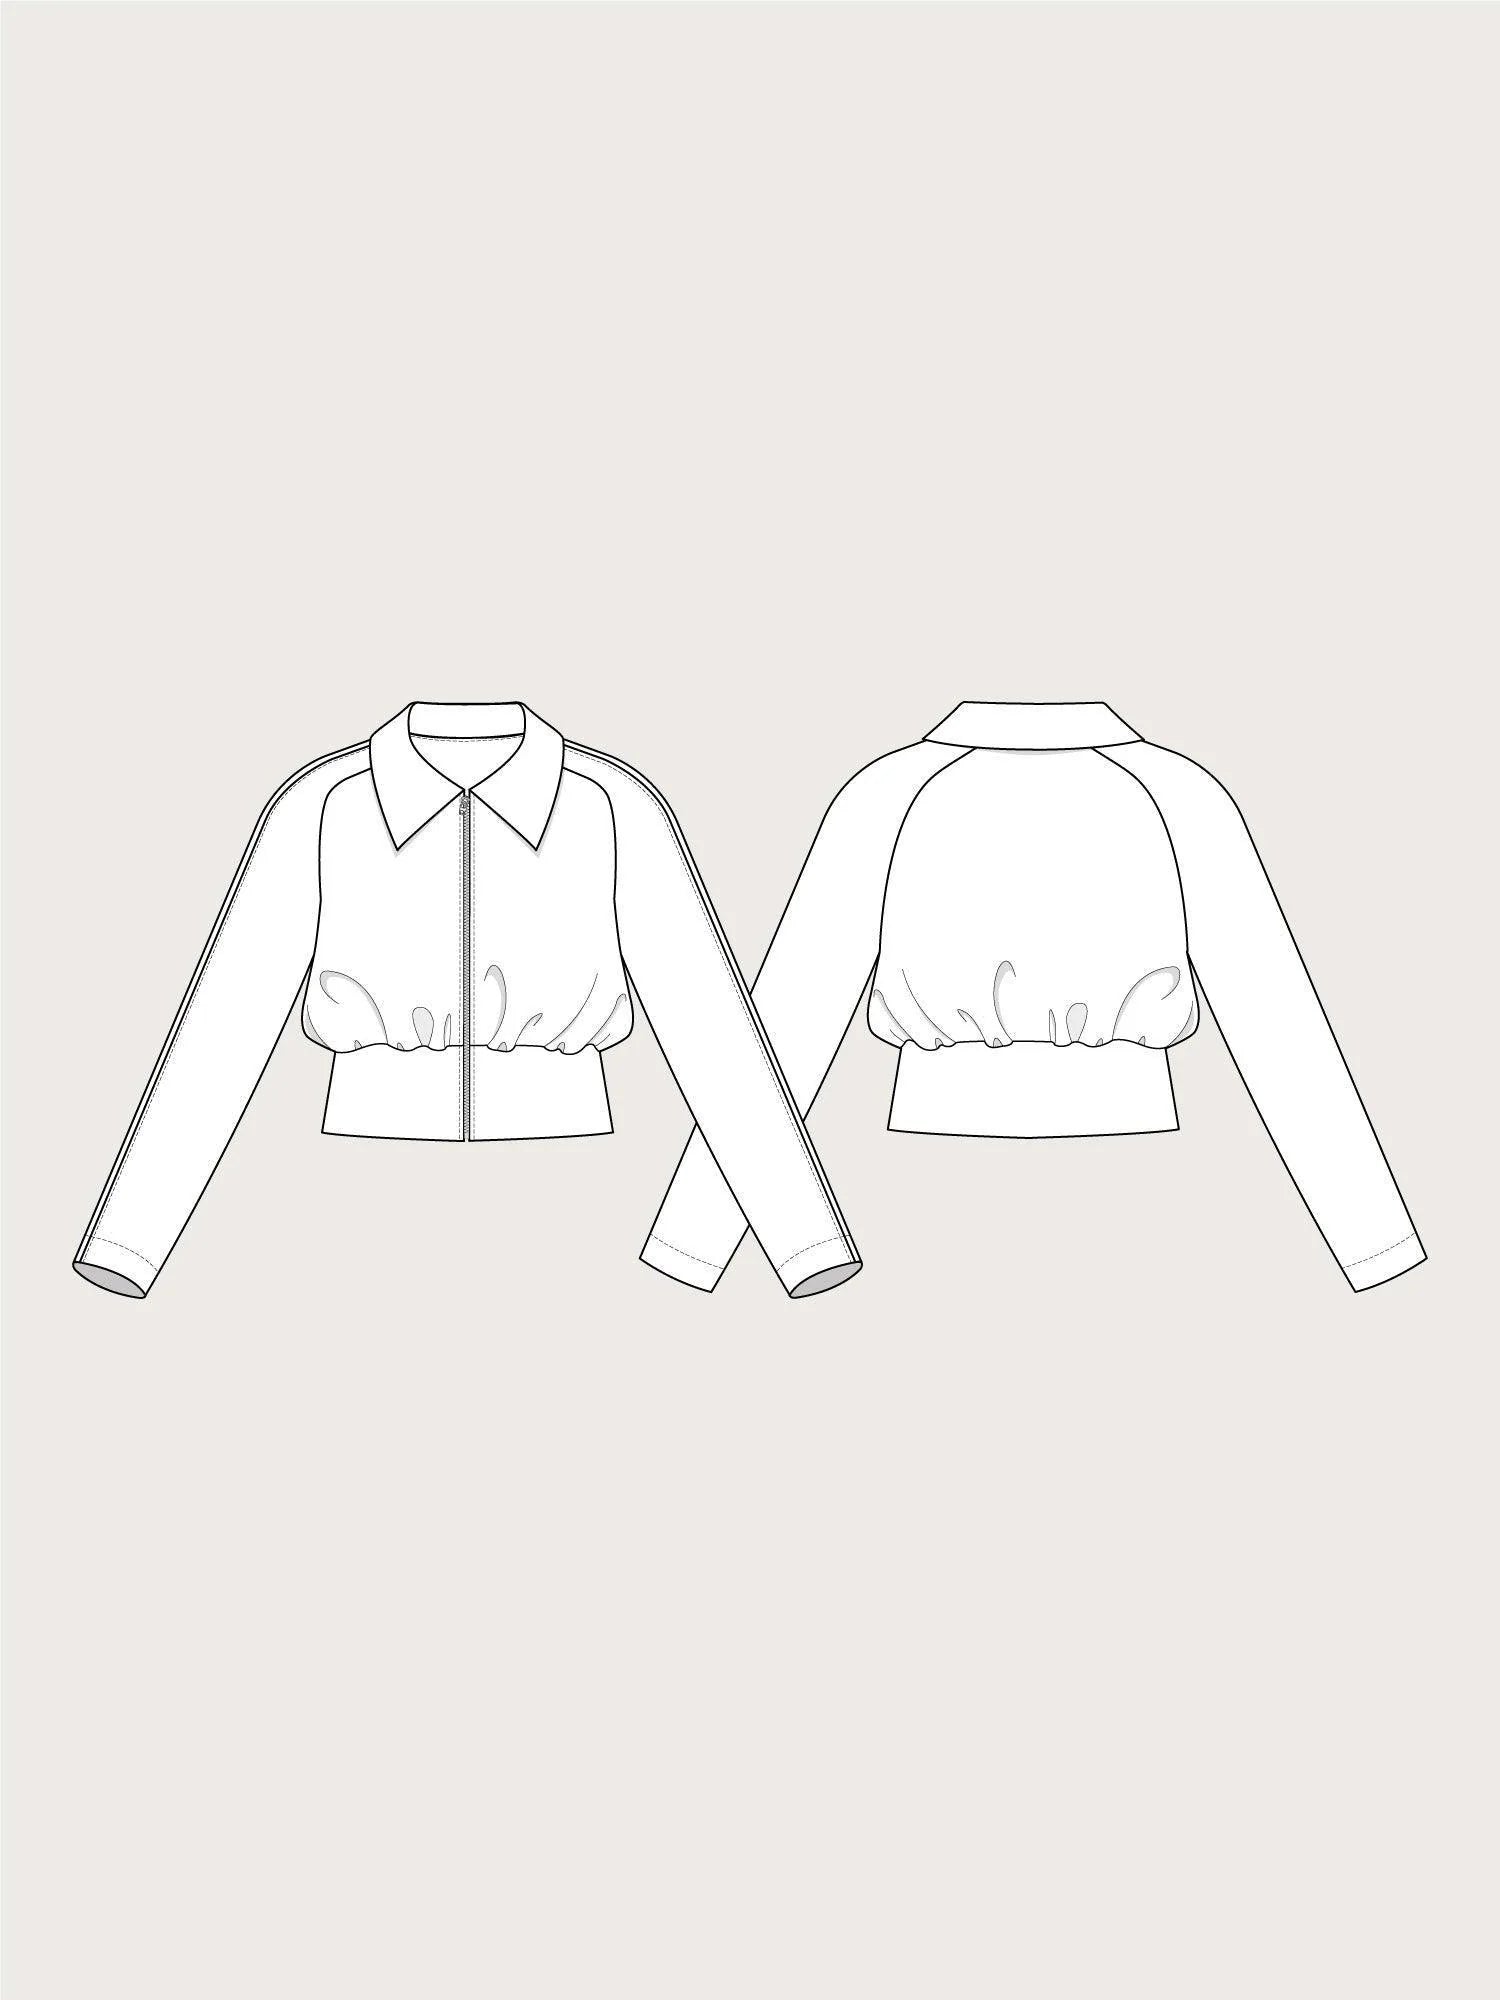 Cropped Jacket sewing pattern by The Assembly Line